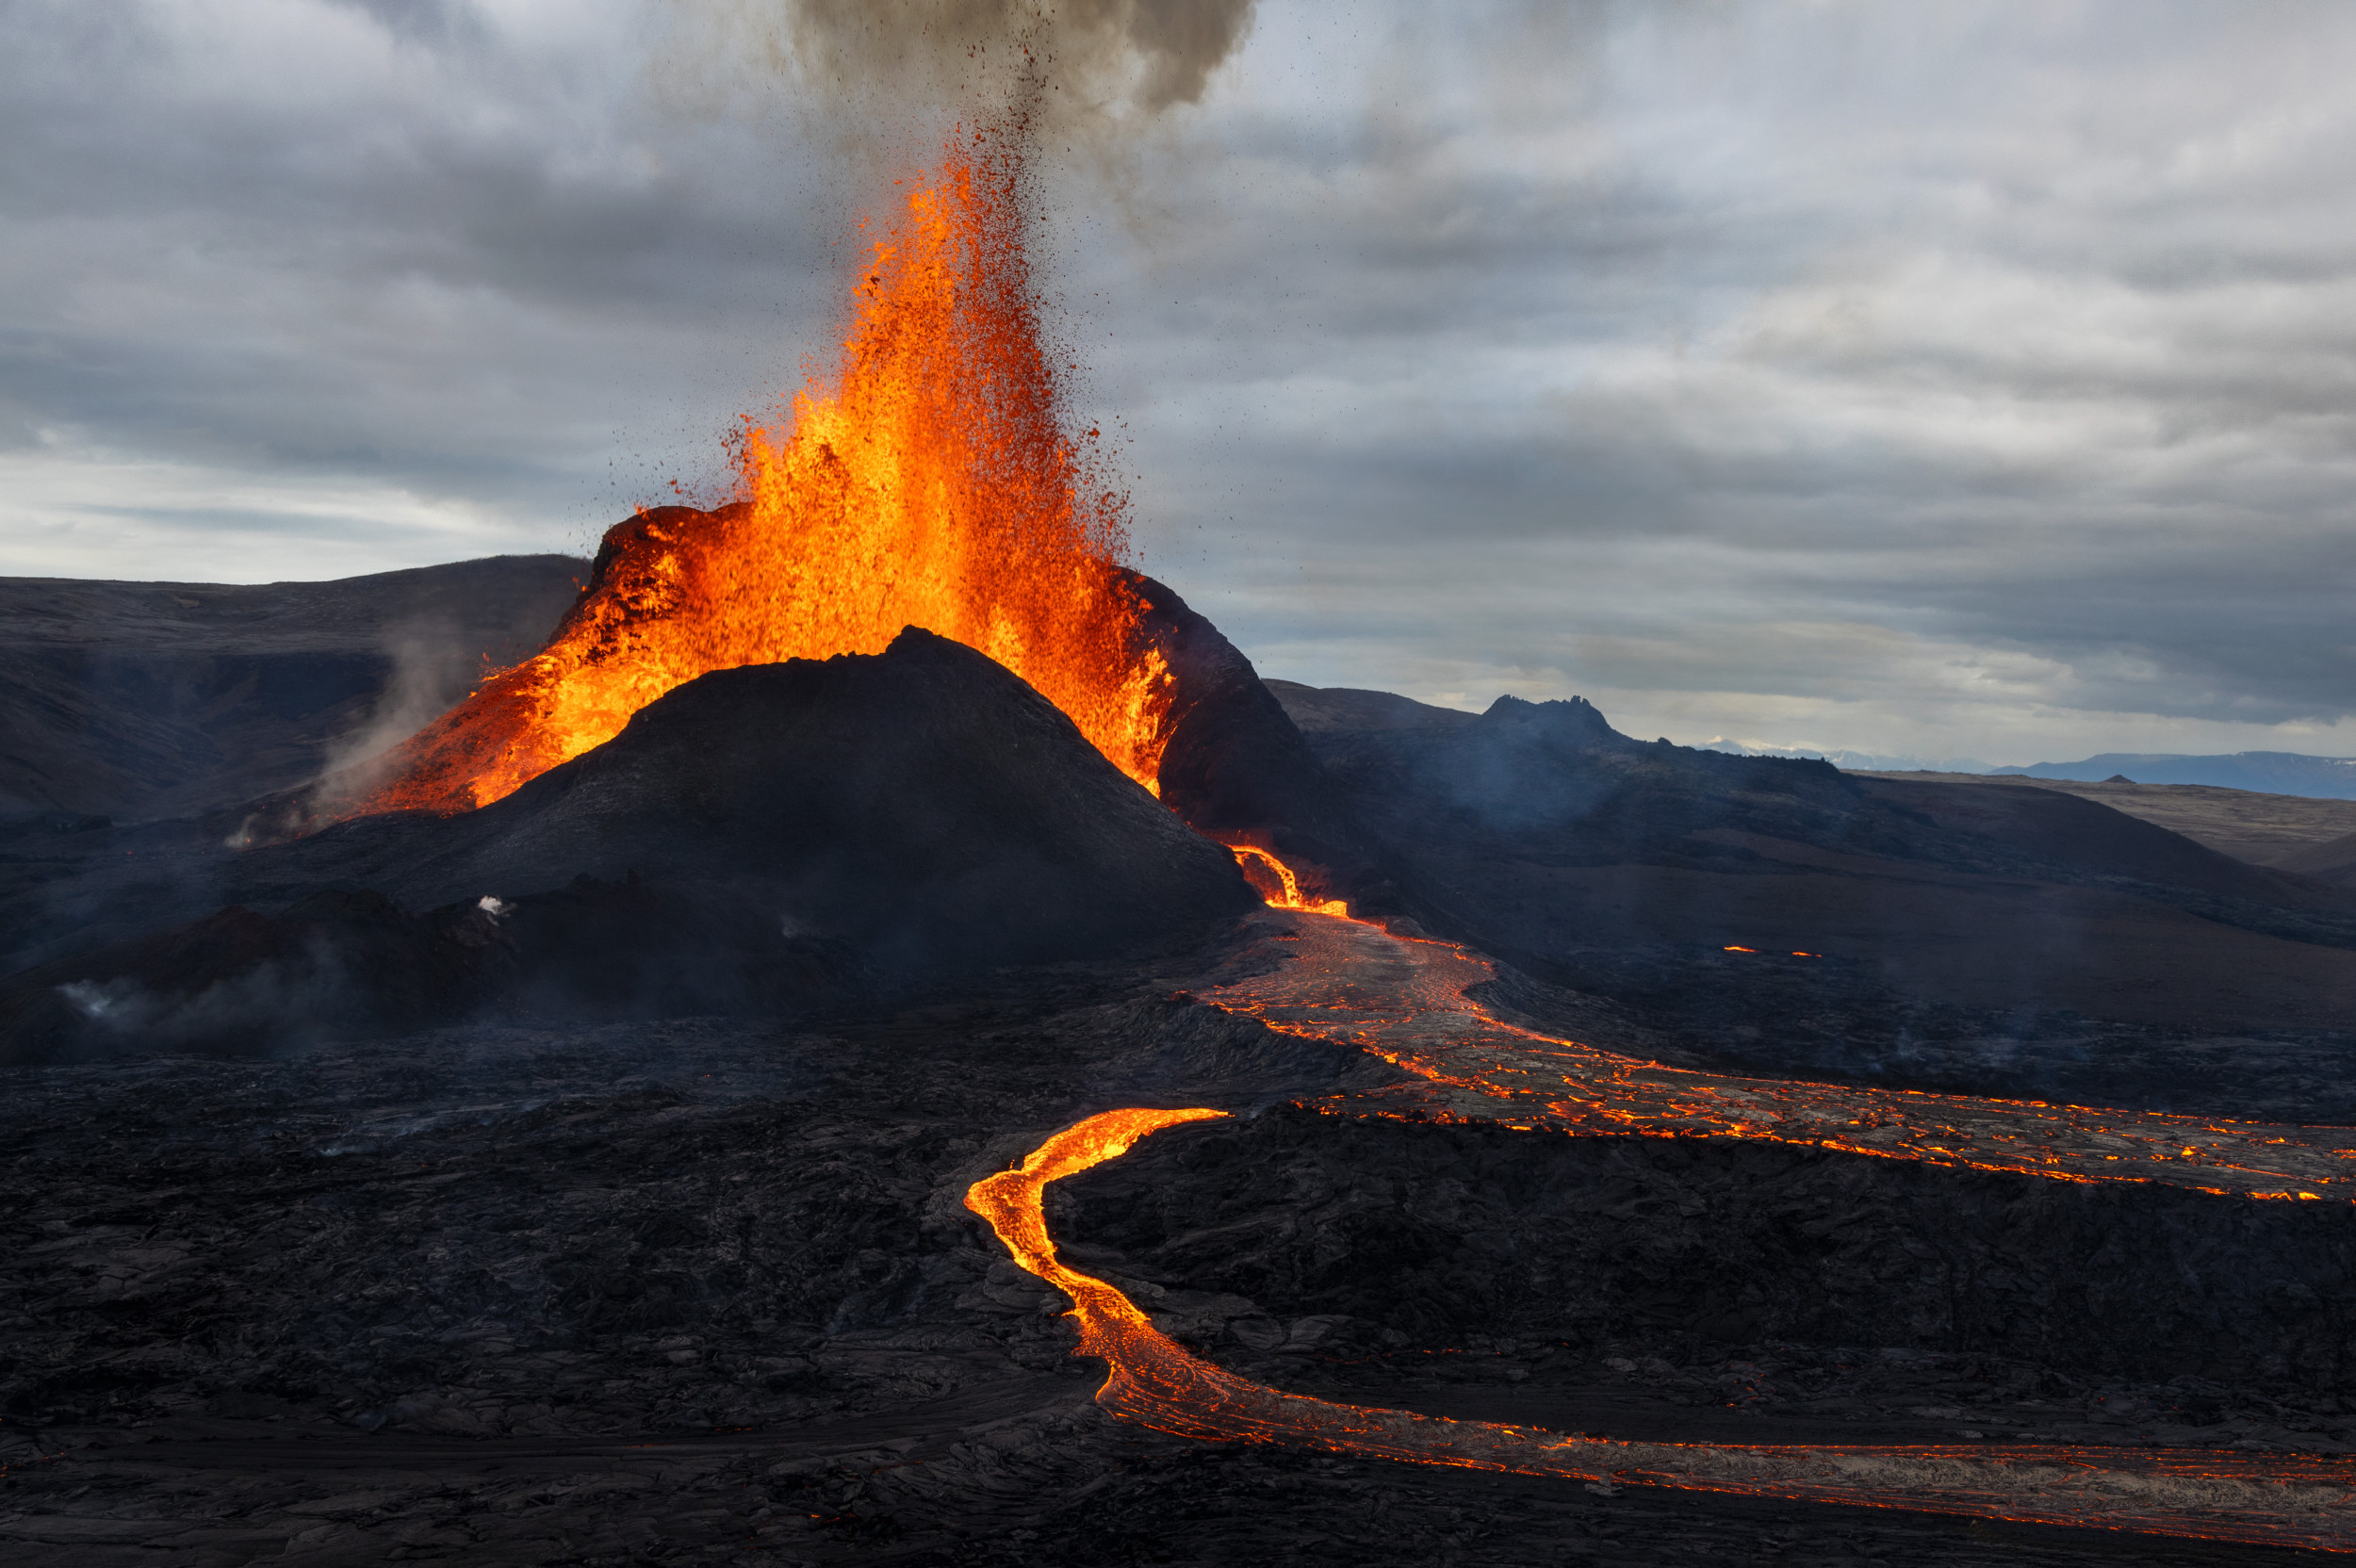 Iceland Volcano Leads Geologists to New Lava Fountain Theory